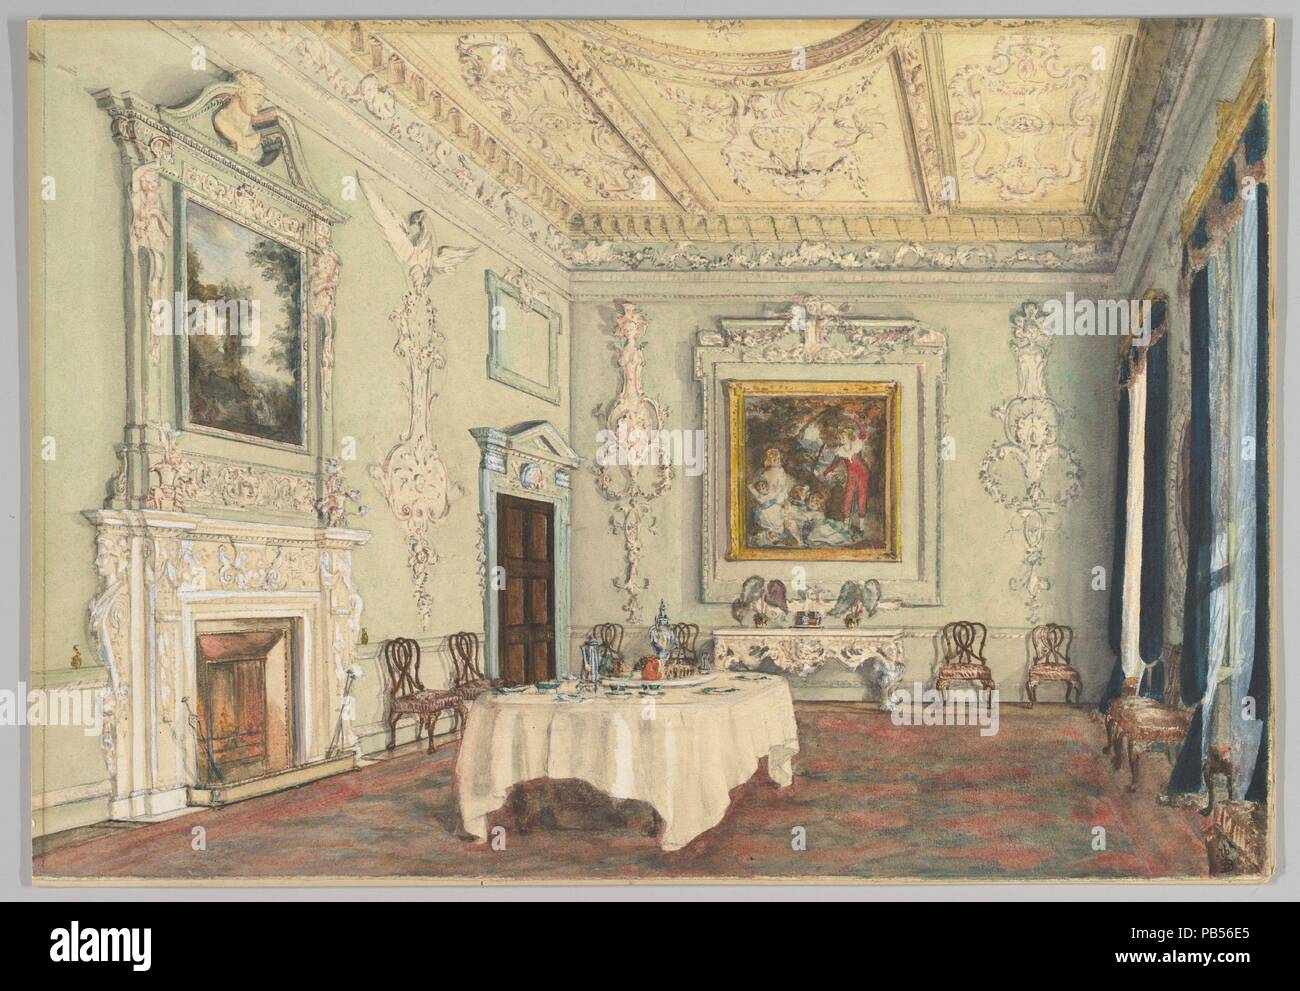 Kirtlington Park, Oxfordshire: View of the Dining Room. Artist: Susan Alice Dashwood (British, 1856-1922). Dimensions: sheet: 13 11/16 x 19 11/16 in. (34.8 x 50 cm). Date: 1876.  This drawing documents the history of the Kirtlington Park dining room, showing the table set for tea in 1876, with its original eighteenth-century dining chairs and side table in place. At this date, the ceiling was still its original yellow and cream colors, while the walls had been repainted a light green. A large Turkish carpet covers most of the wooden floor. Museum: Metropolitan Museum of Art, New York, USA. Stock Photo